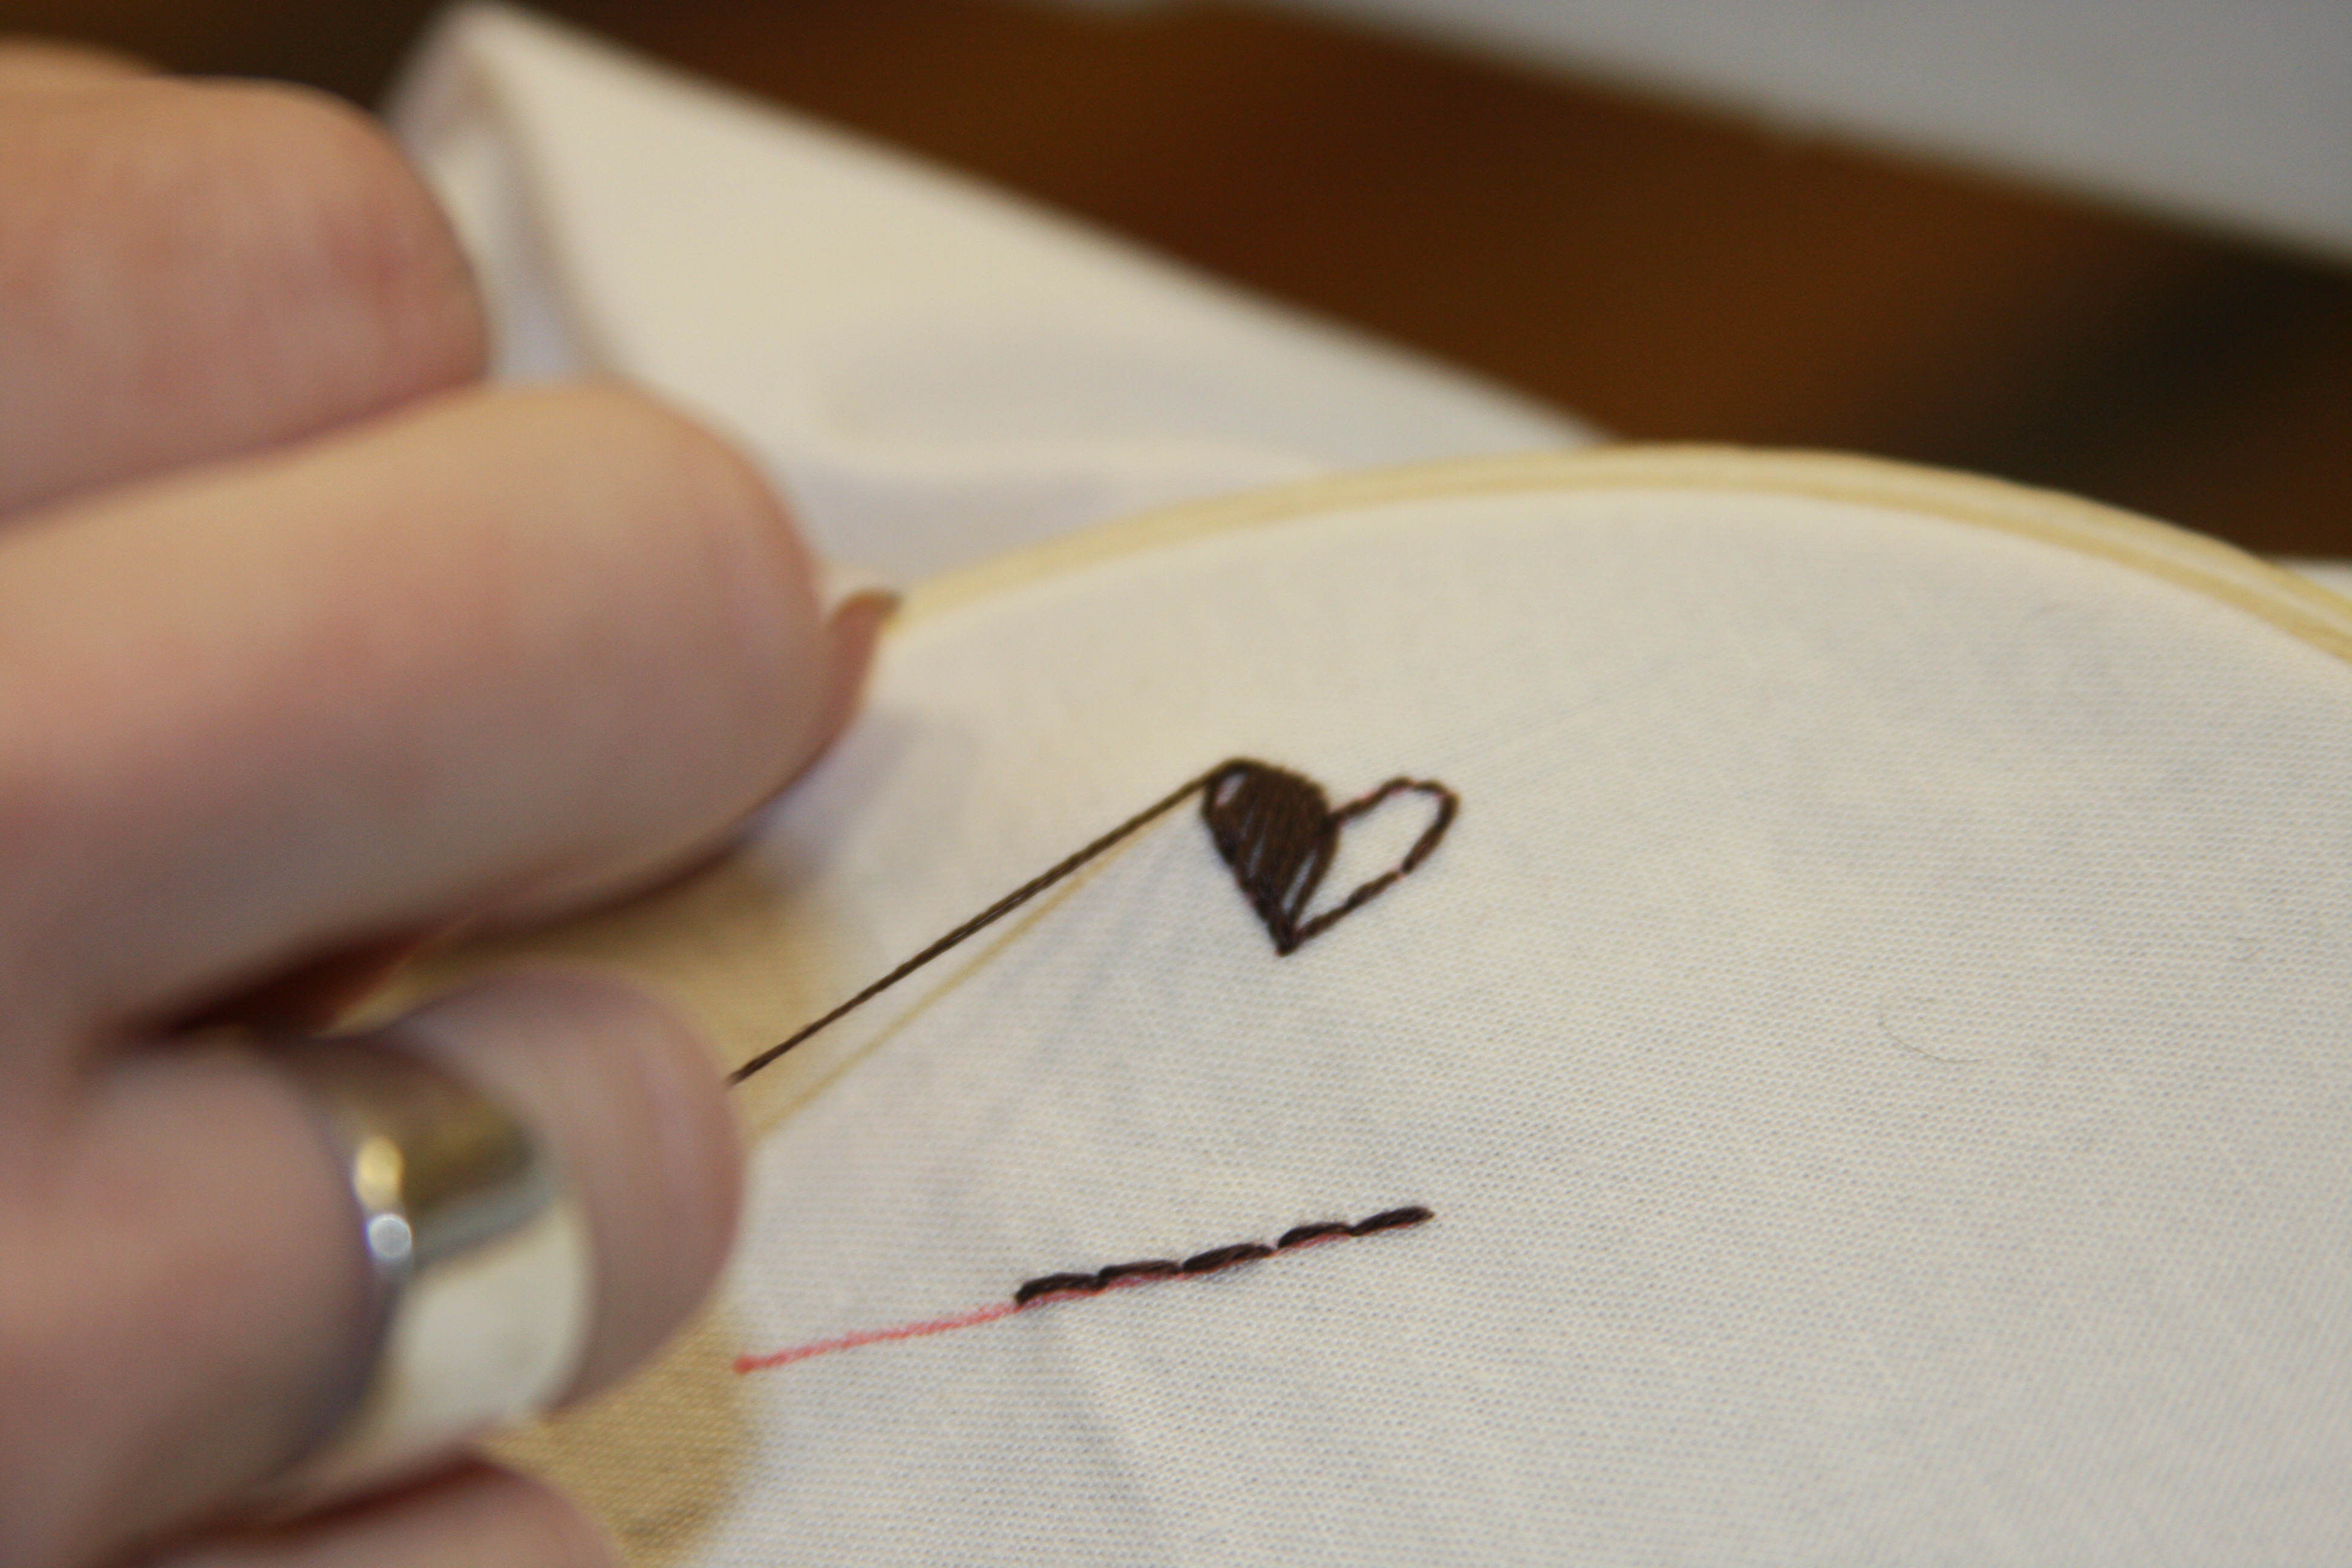 How To Embroider: basic stitches